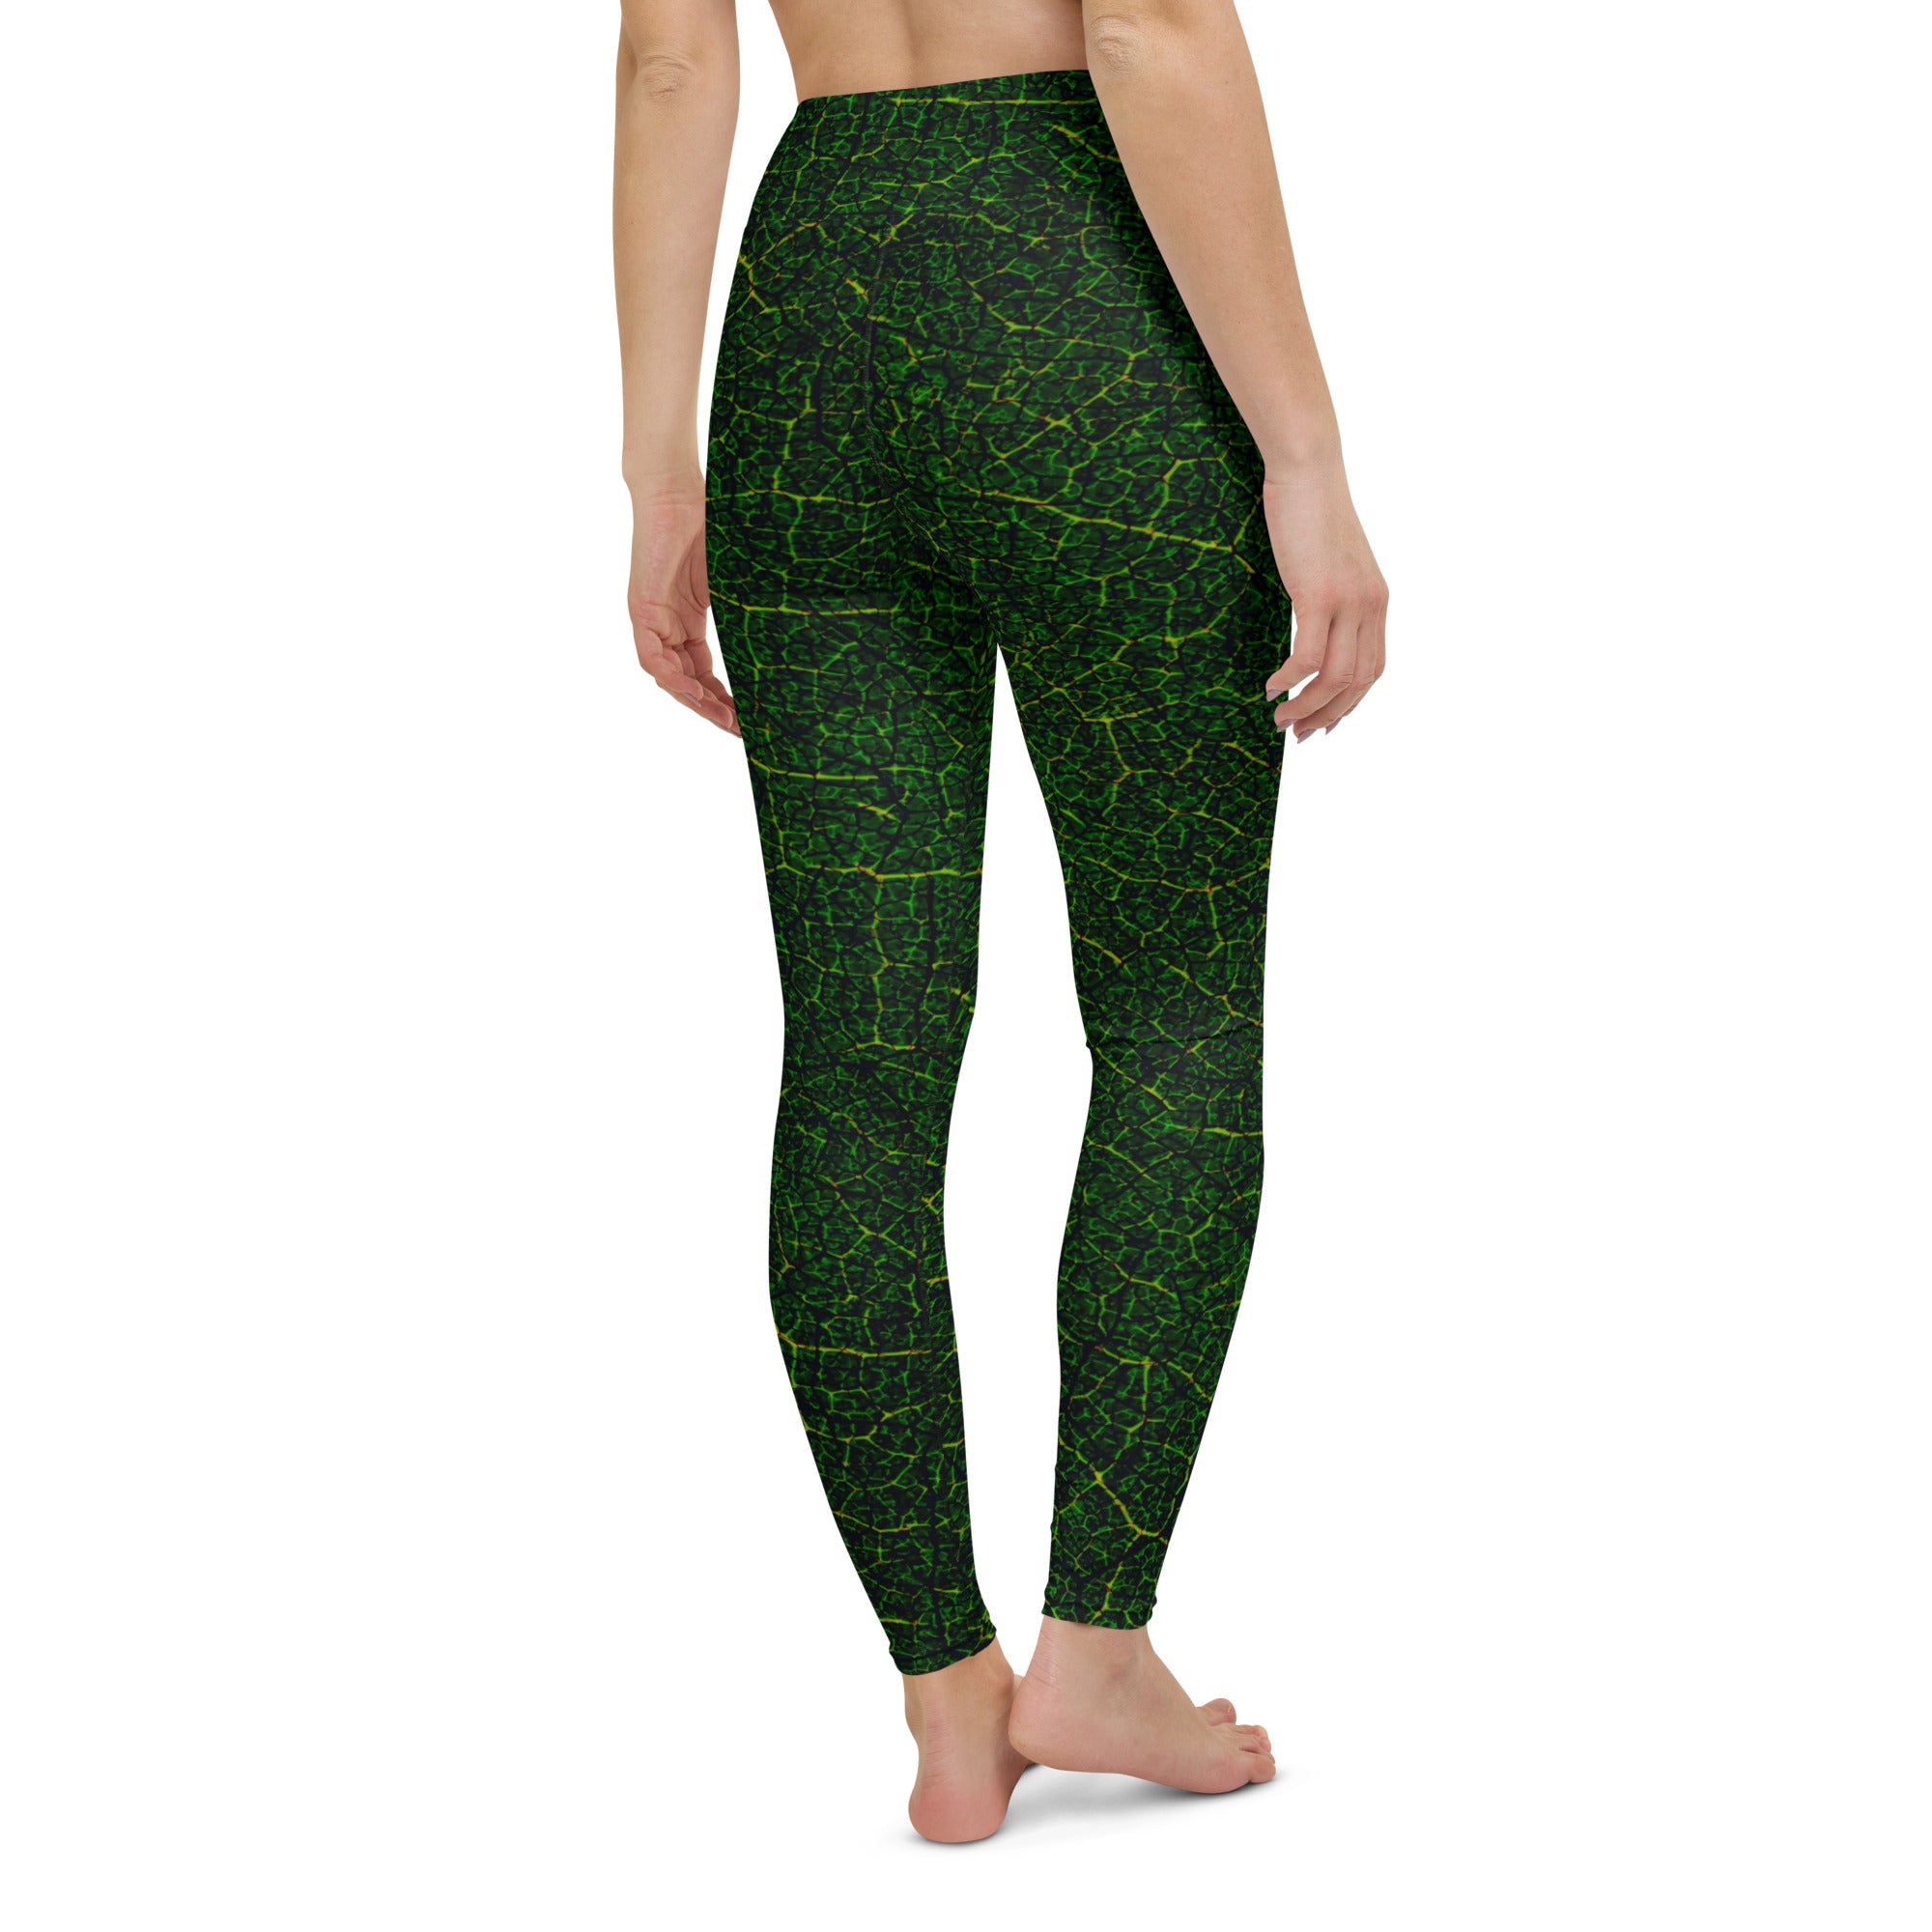 Detail shot of Verdant Vines Yoga Leggings’ fabric and print, focusing on the durability and detailed aesthetics for active and casual wear.